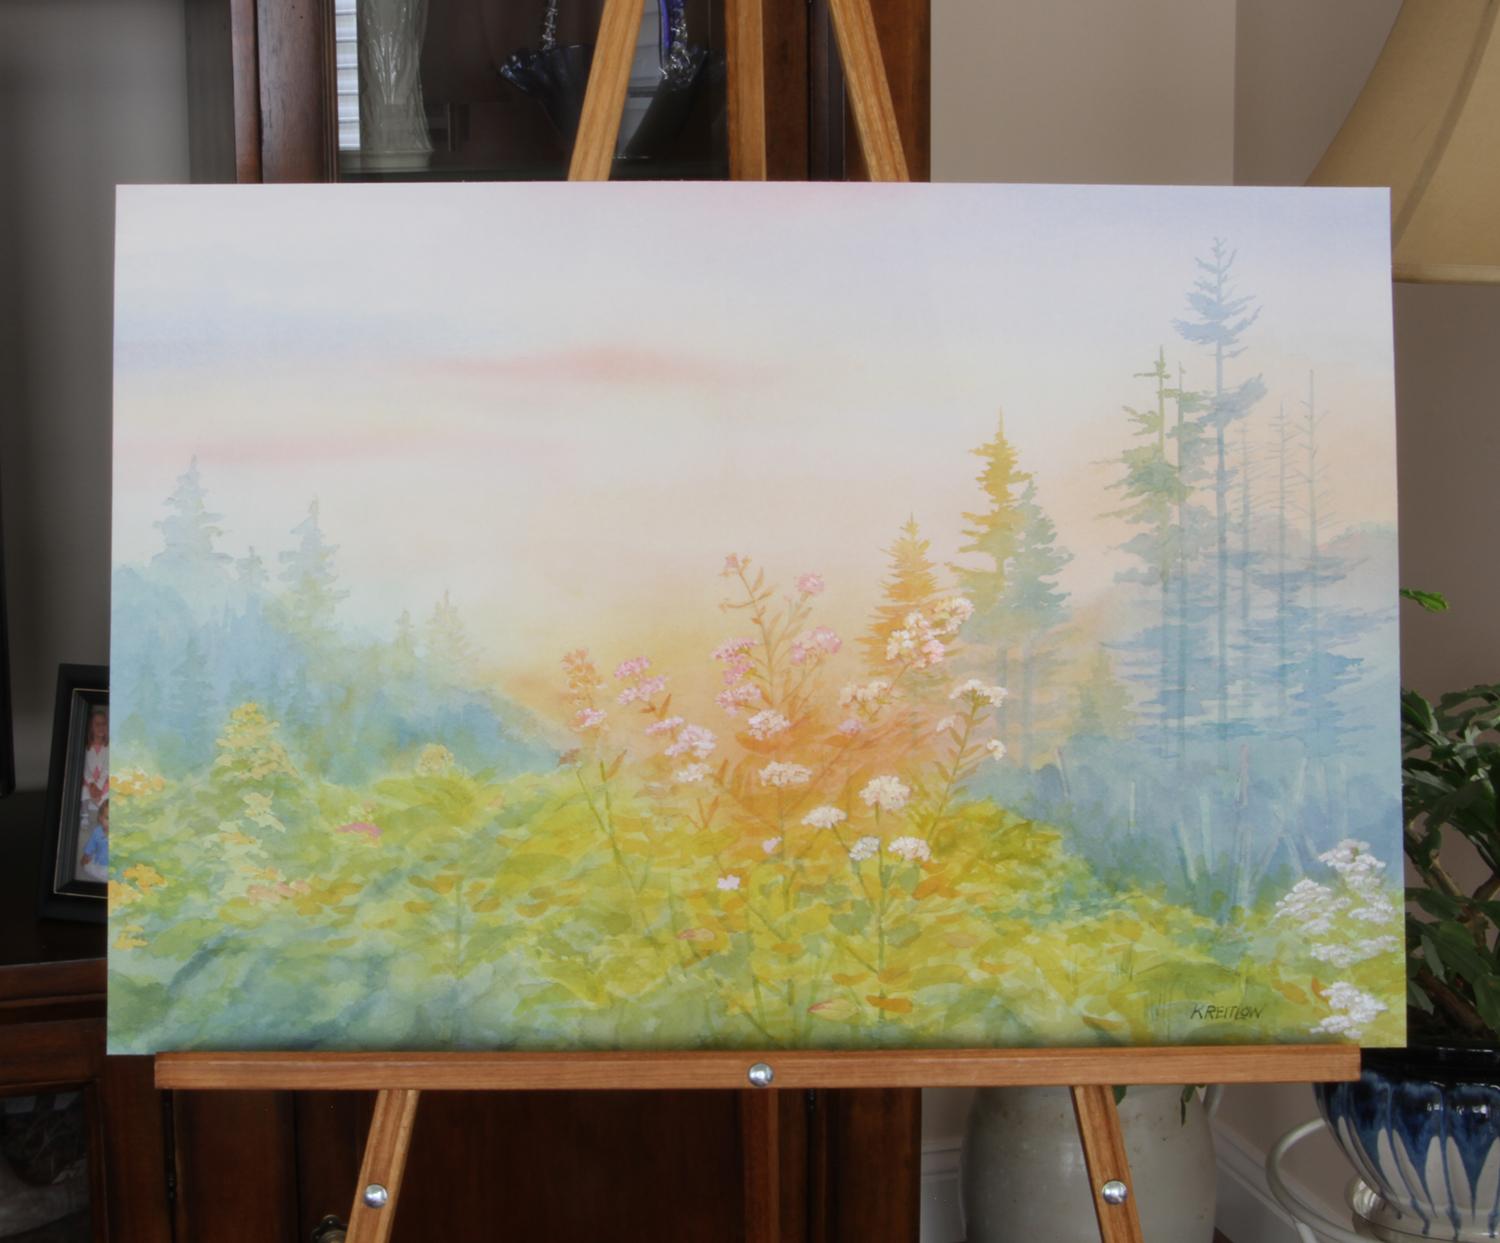 <p>Artist Comments<br>This is my third attempt at this piece. I have loved the glow of the setting sun in the mountains on the wild flowers and surrounding foliage and trees. This for me has been a softer use of color from my previous